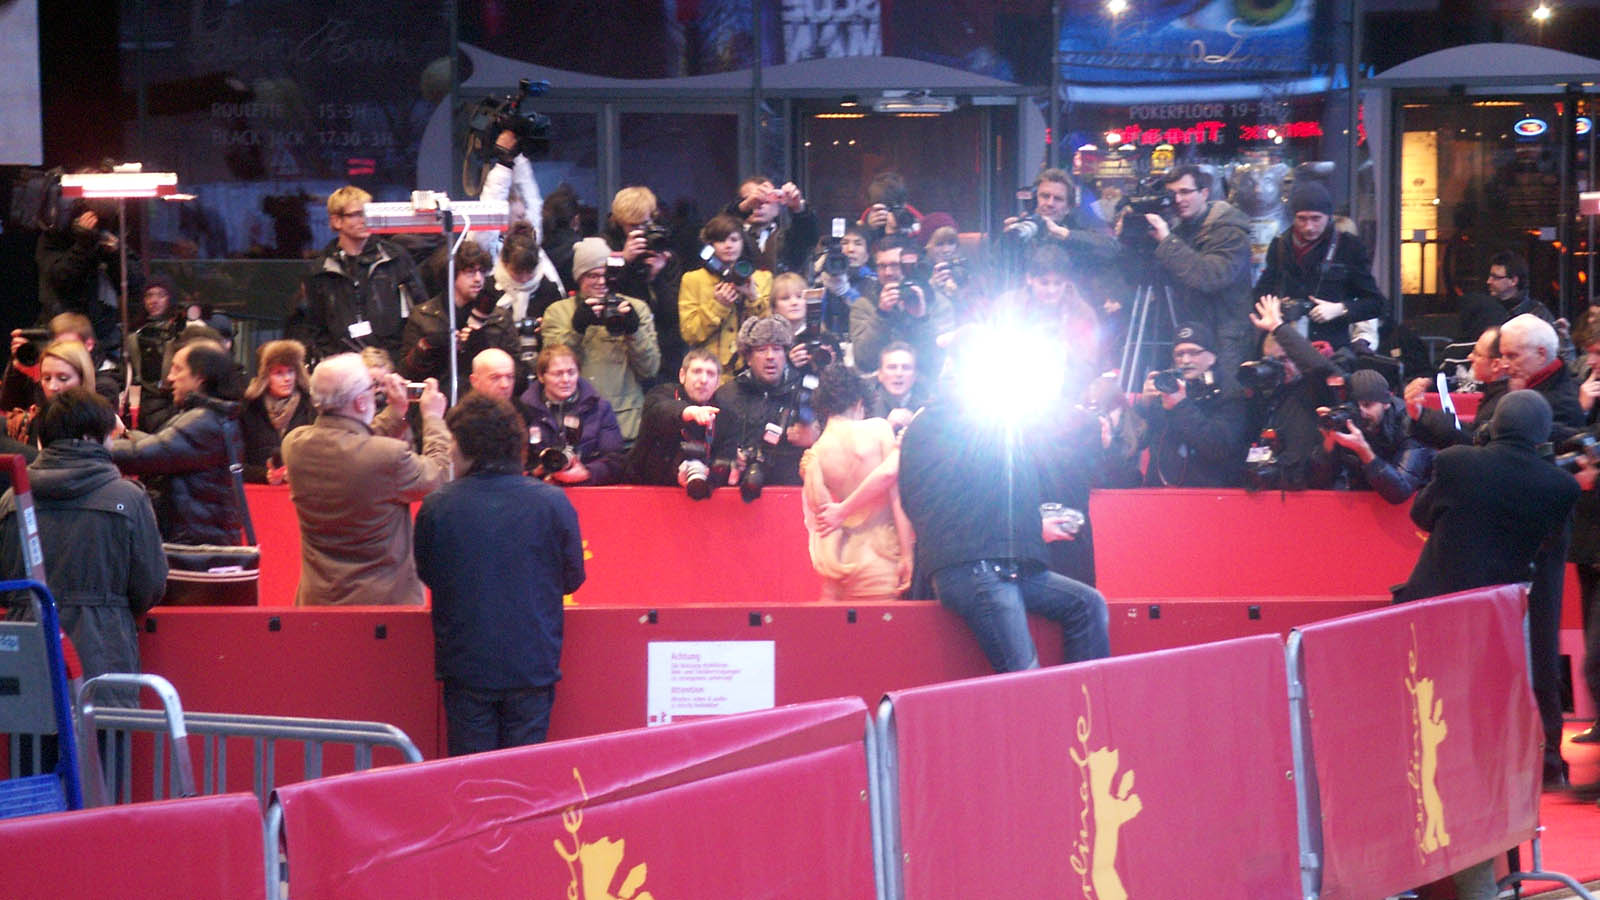 Roter Teppich Berlinale